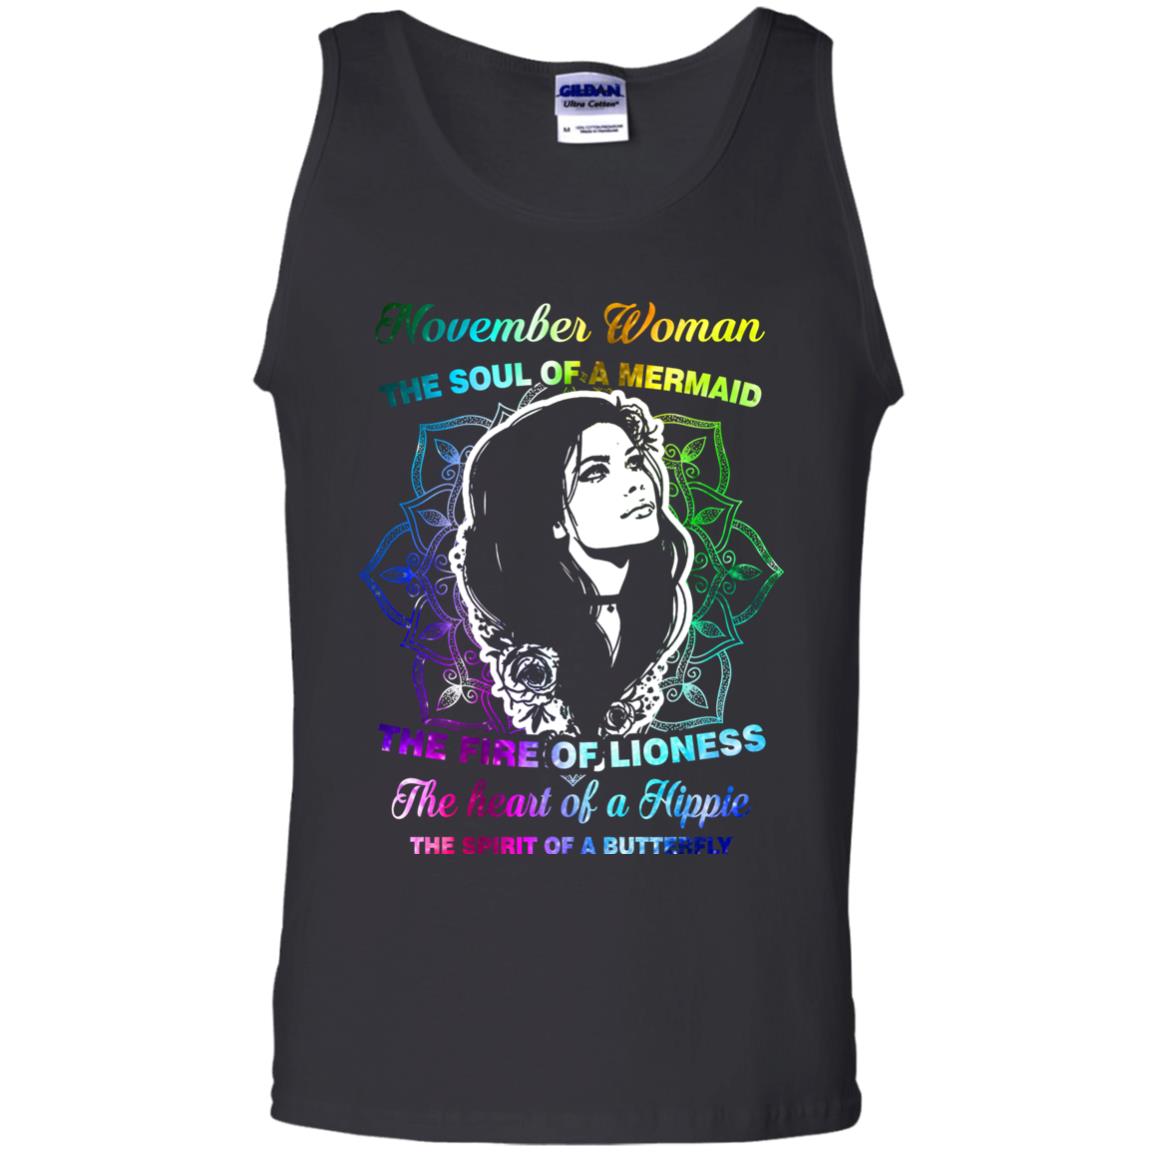 November Woman Shirt The Soul Of A Mermaid The Fire Of Lioness The Heart Of A Hippeie The Spirit Of A ButterflyG220 Gildan 100% Cotton Tank Top